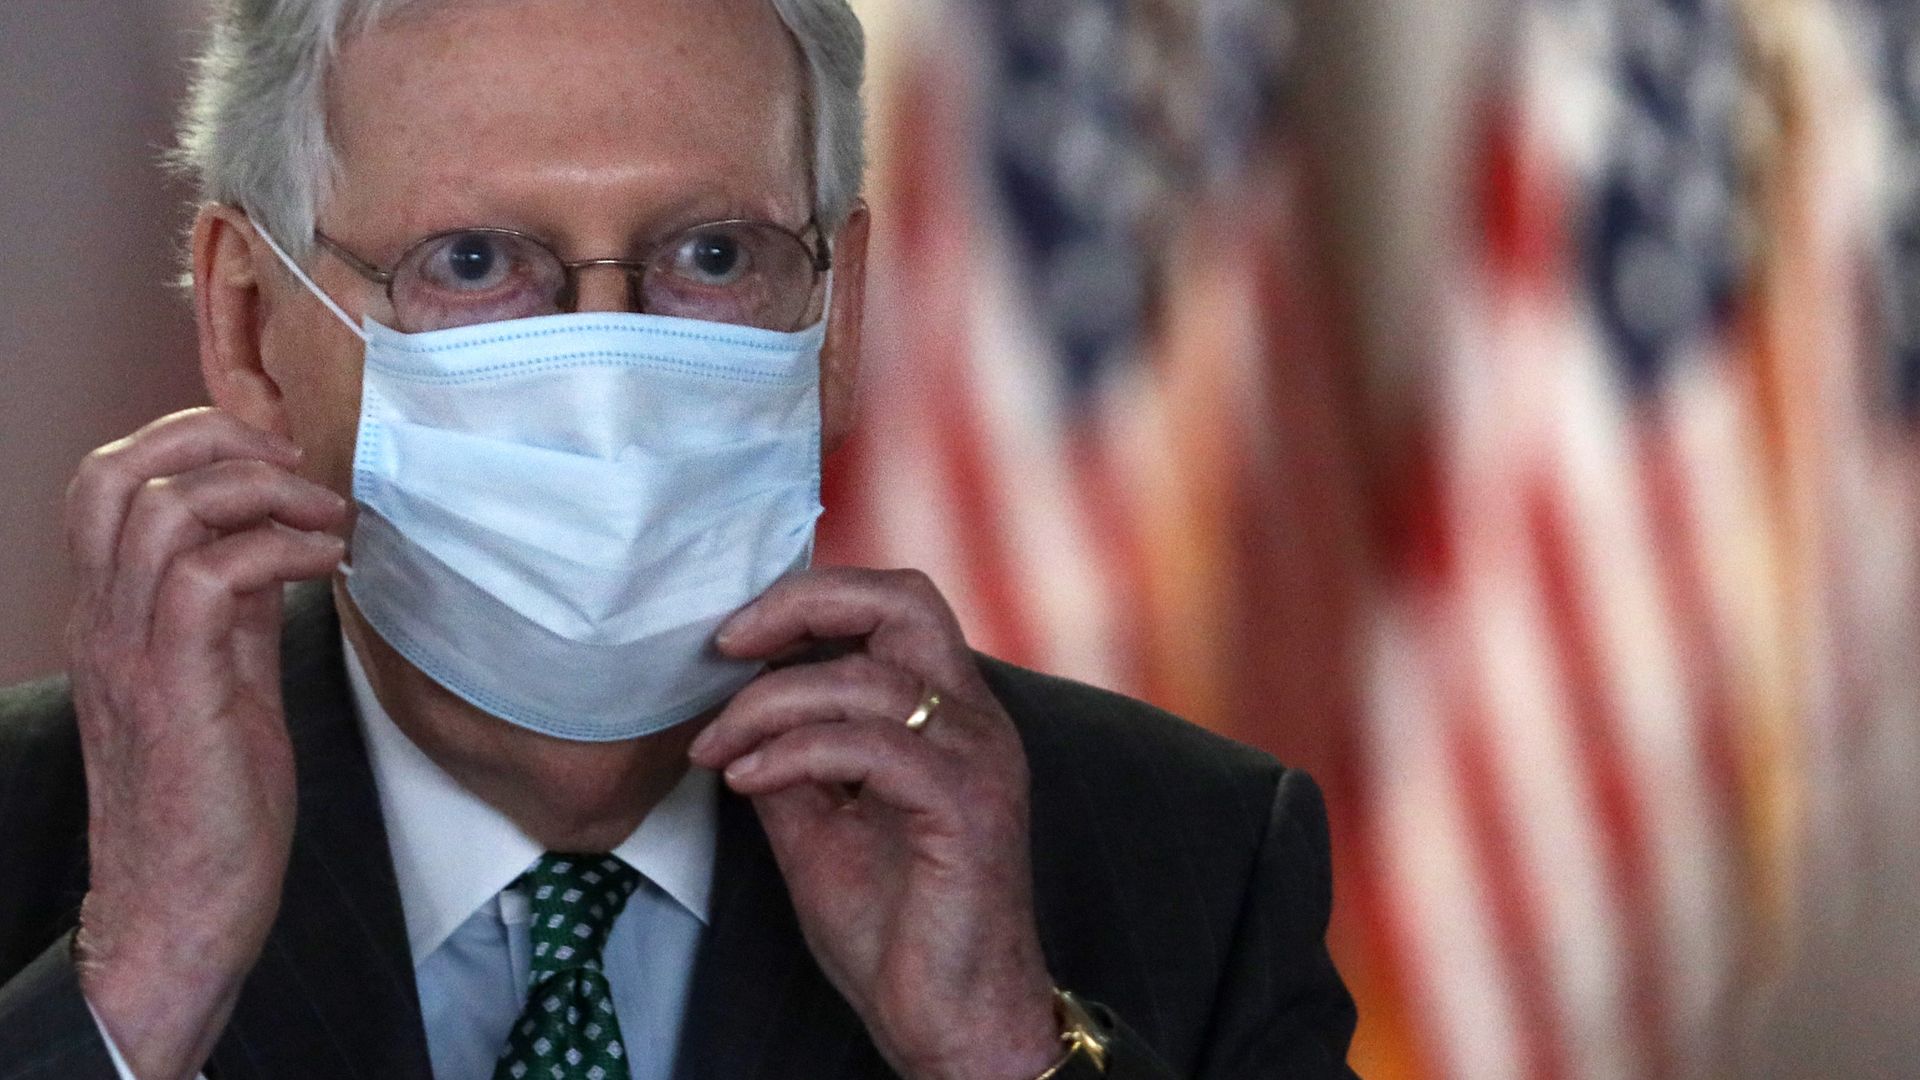 Senate Majority Leader Mitch McConnell (R-KY) puts on his face mask after speaking to members of the media following the weekly Senate Republican Policy Luncheon 